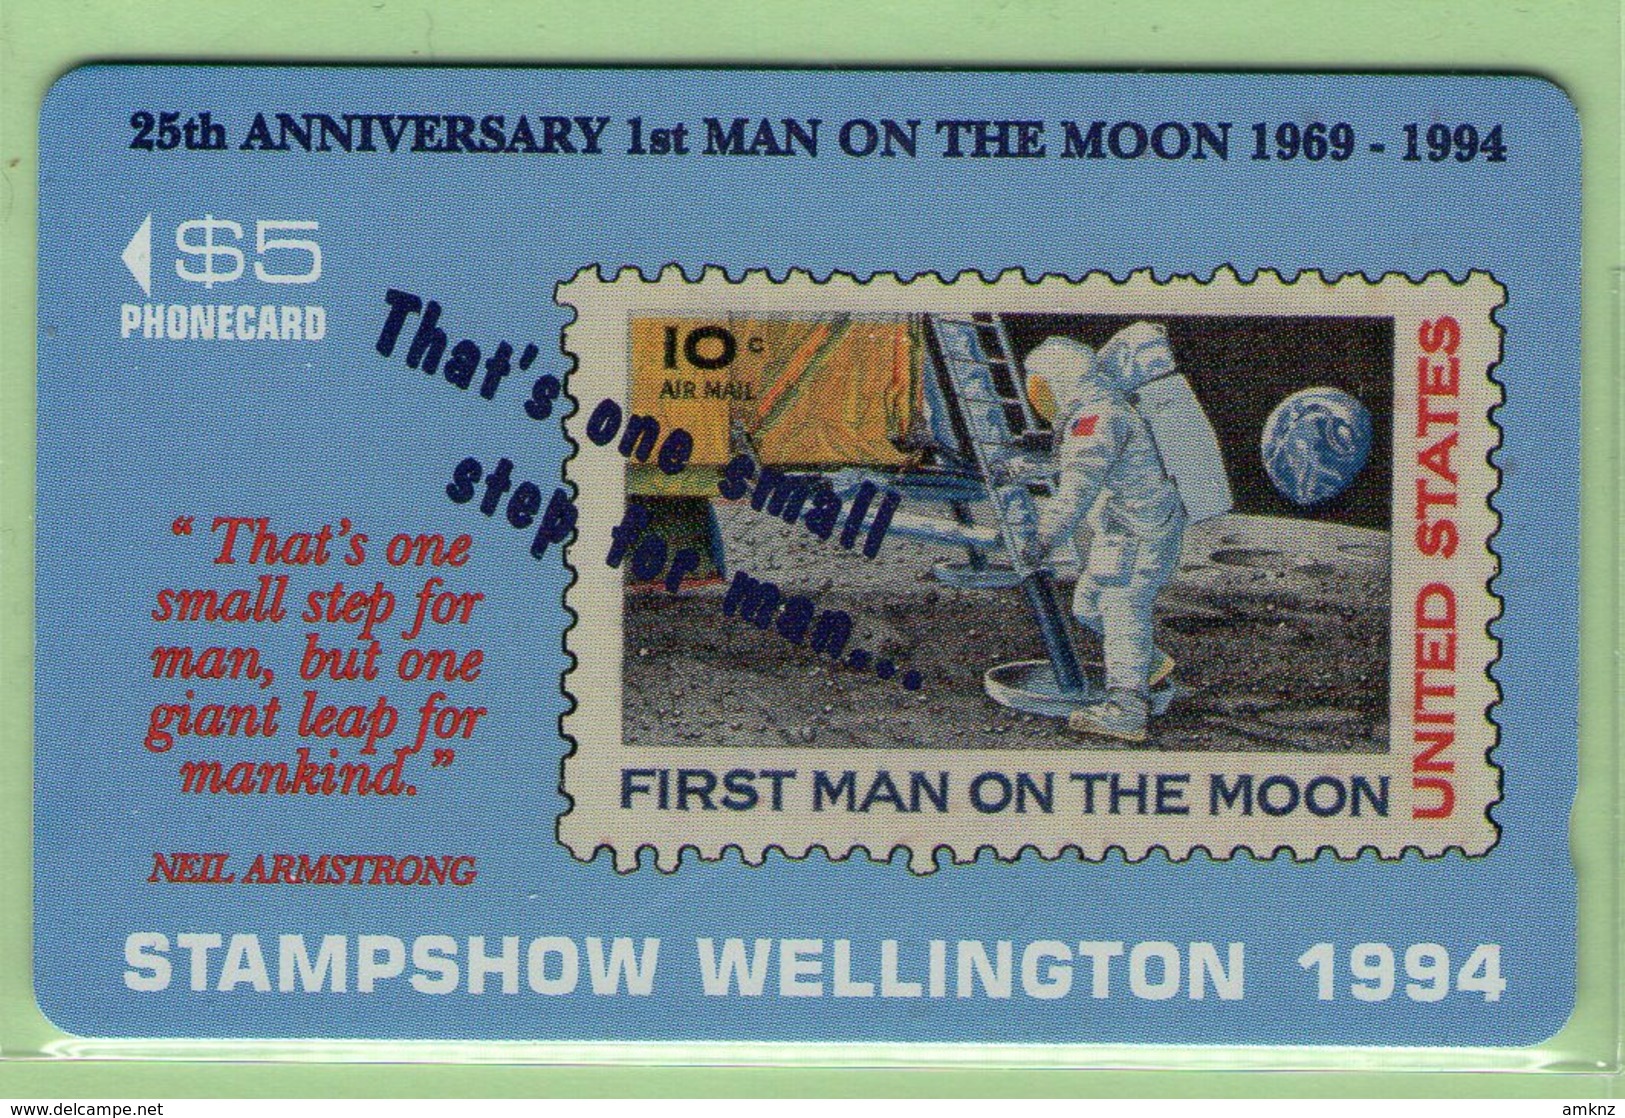 New Zealand - Private Overprint - 1994 Stampshow, Wellington - $5 Man On The Moon - Mint - NZ-CO-31 - New Zealand